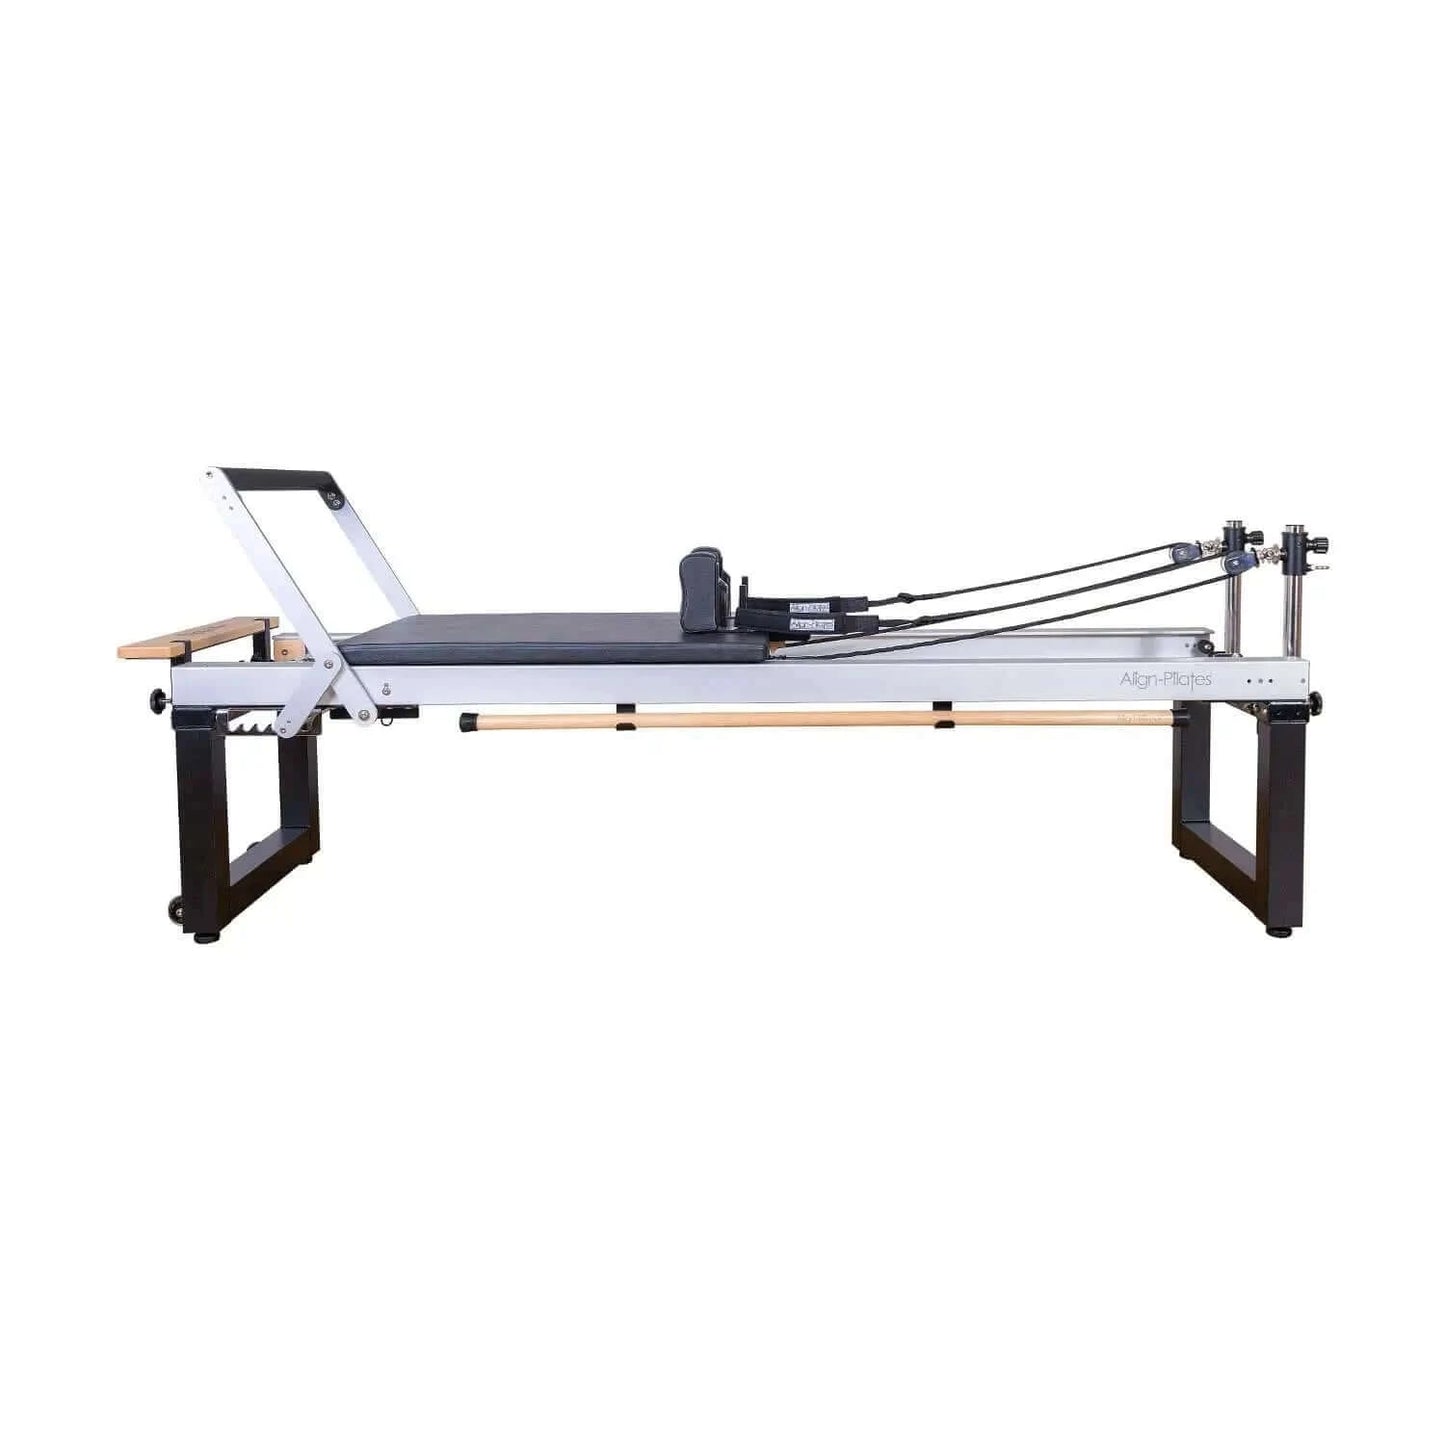  Align Pilates A8 Pro Reformer Machine by Align Pilates sold by Pilates Matters® by BSP LLC